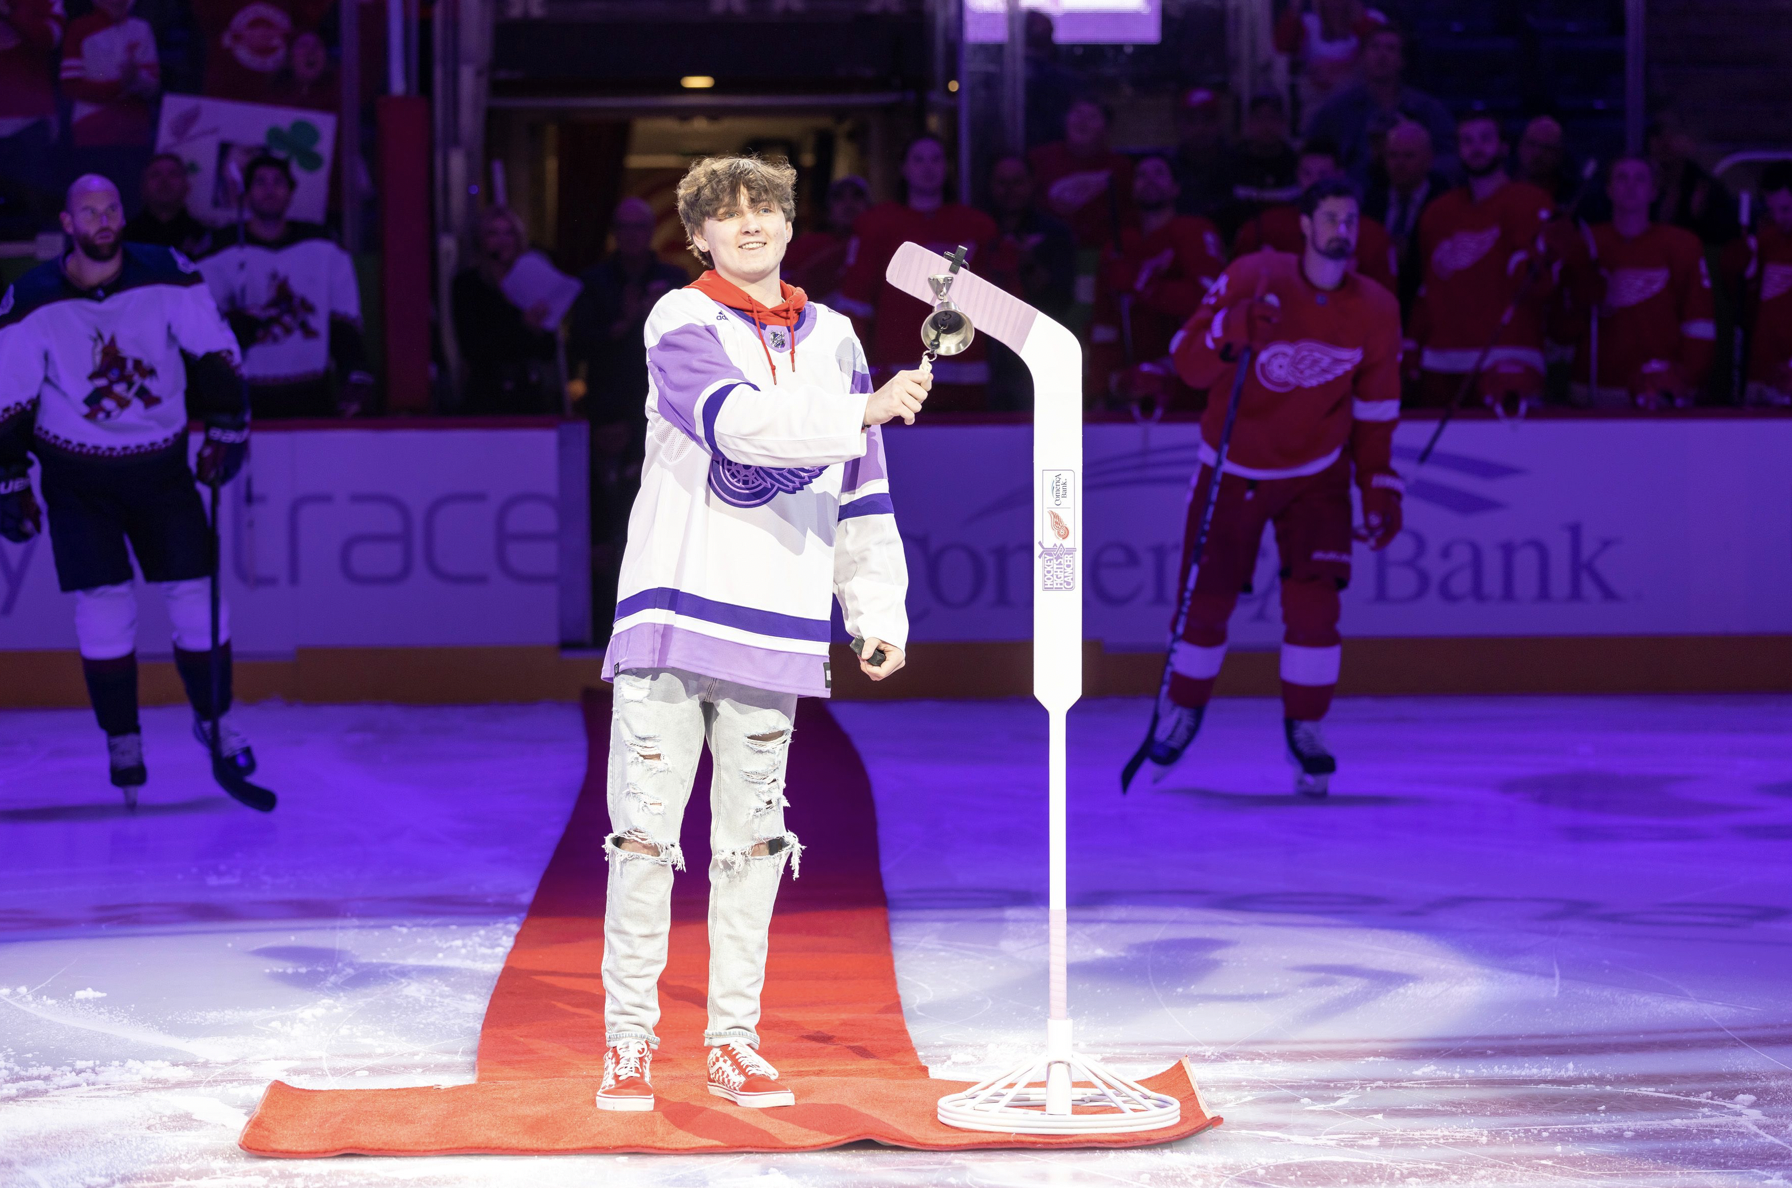 Hockey Fights Cancer Ceremonial Puck Drop 